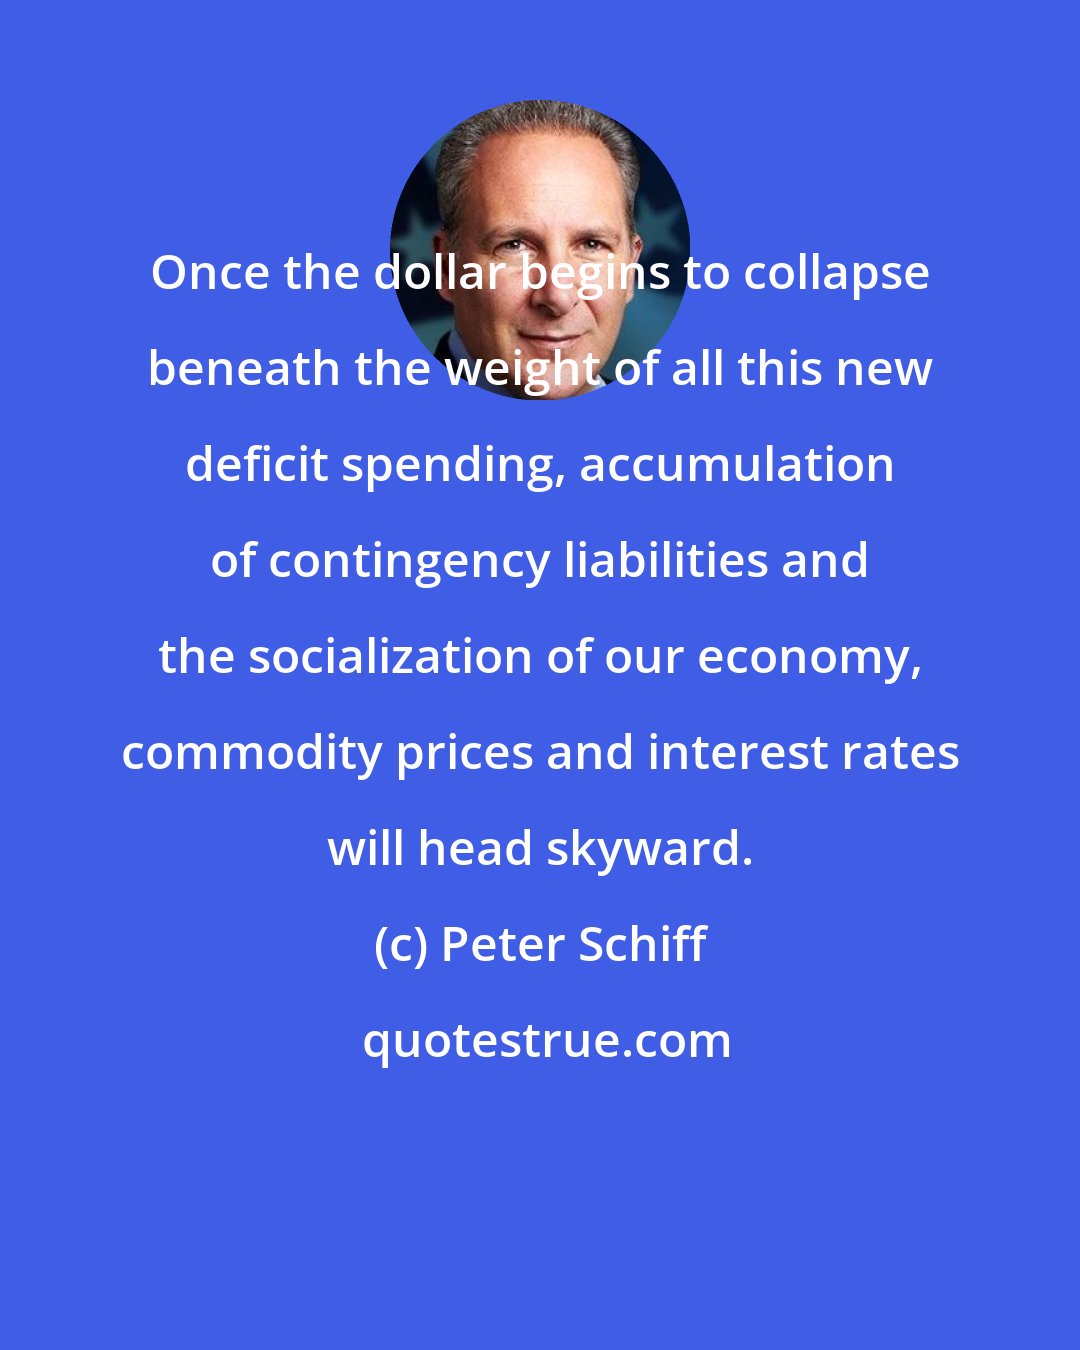 Peter Schiff: Once the dollar begins to collapse beneath the weight of all this new deficit spending, accumulation of contingency liabilities and the socialization of our economy, commodity prices and interest rates will head skyward.